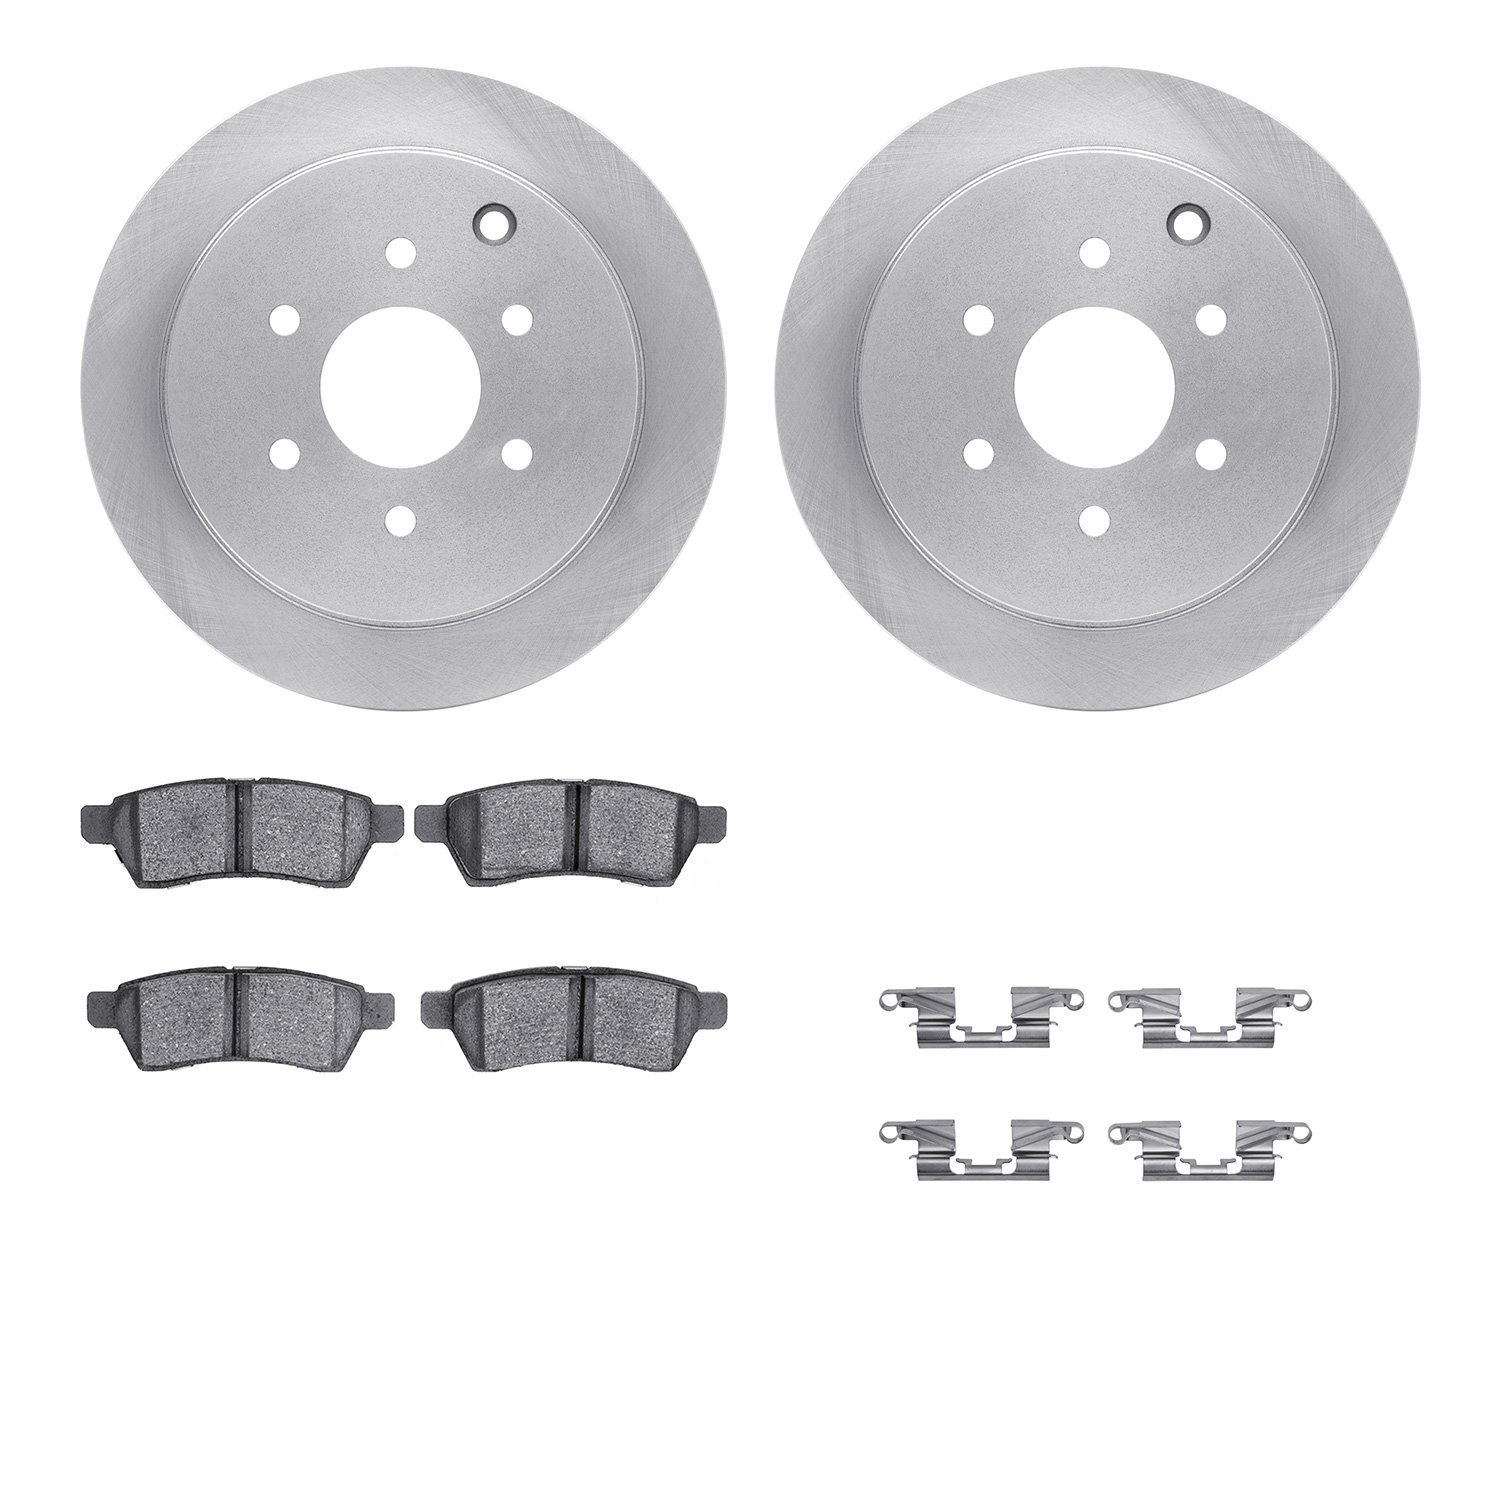 6312-67110 Brake Rotors with 3000-Series Ceramic Brake Pads Kit with Hardware, Fits Select Multiple Makes/Models, Position: Rear